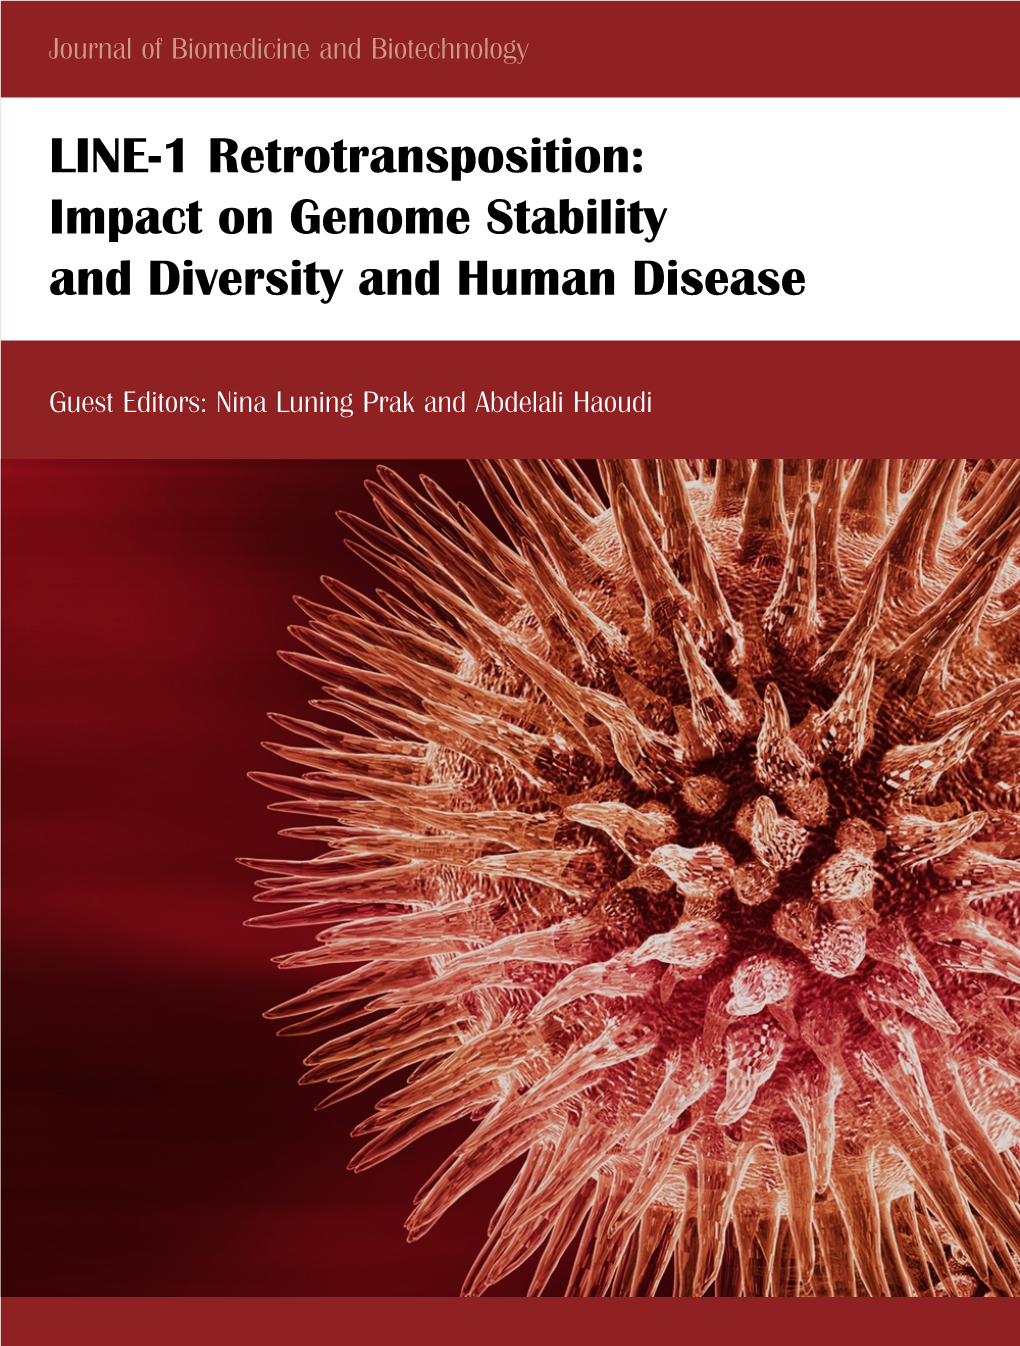 LINE-1 Retrotransposition: Impact on Genome Stability and Diversity and Human Disease